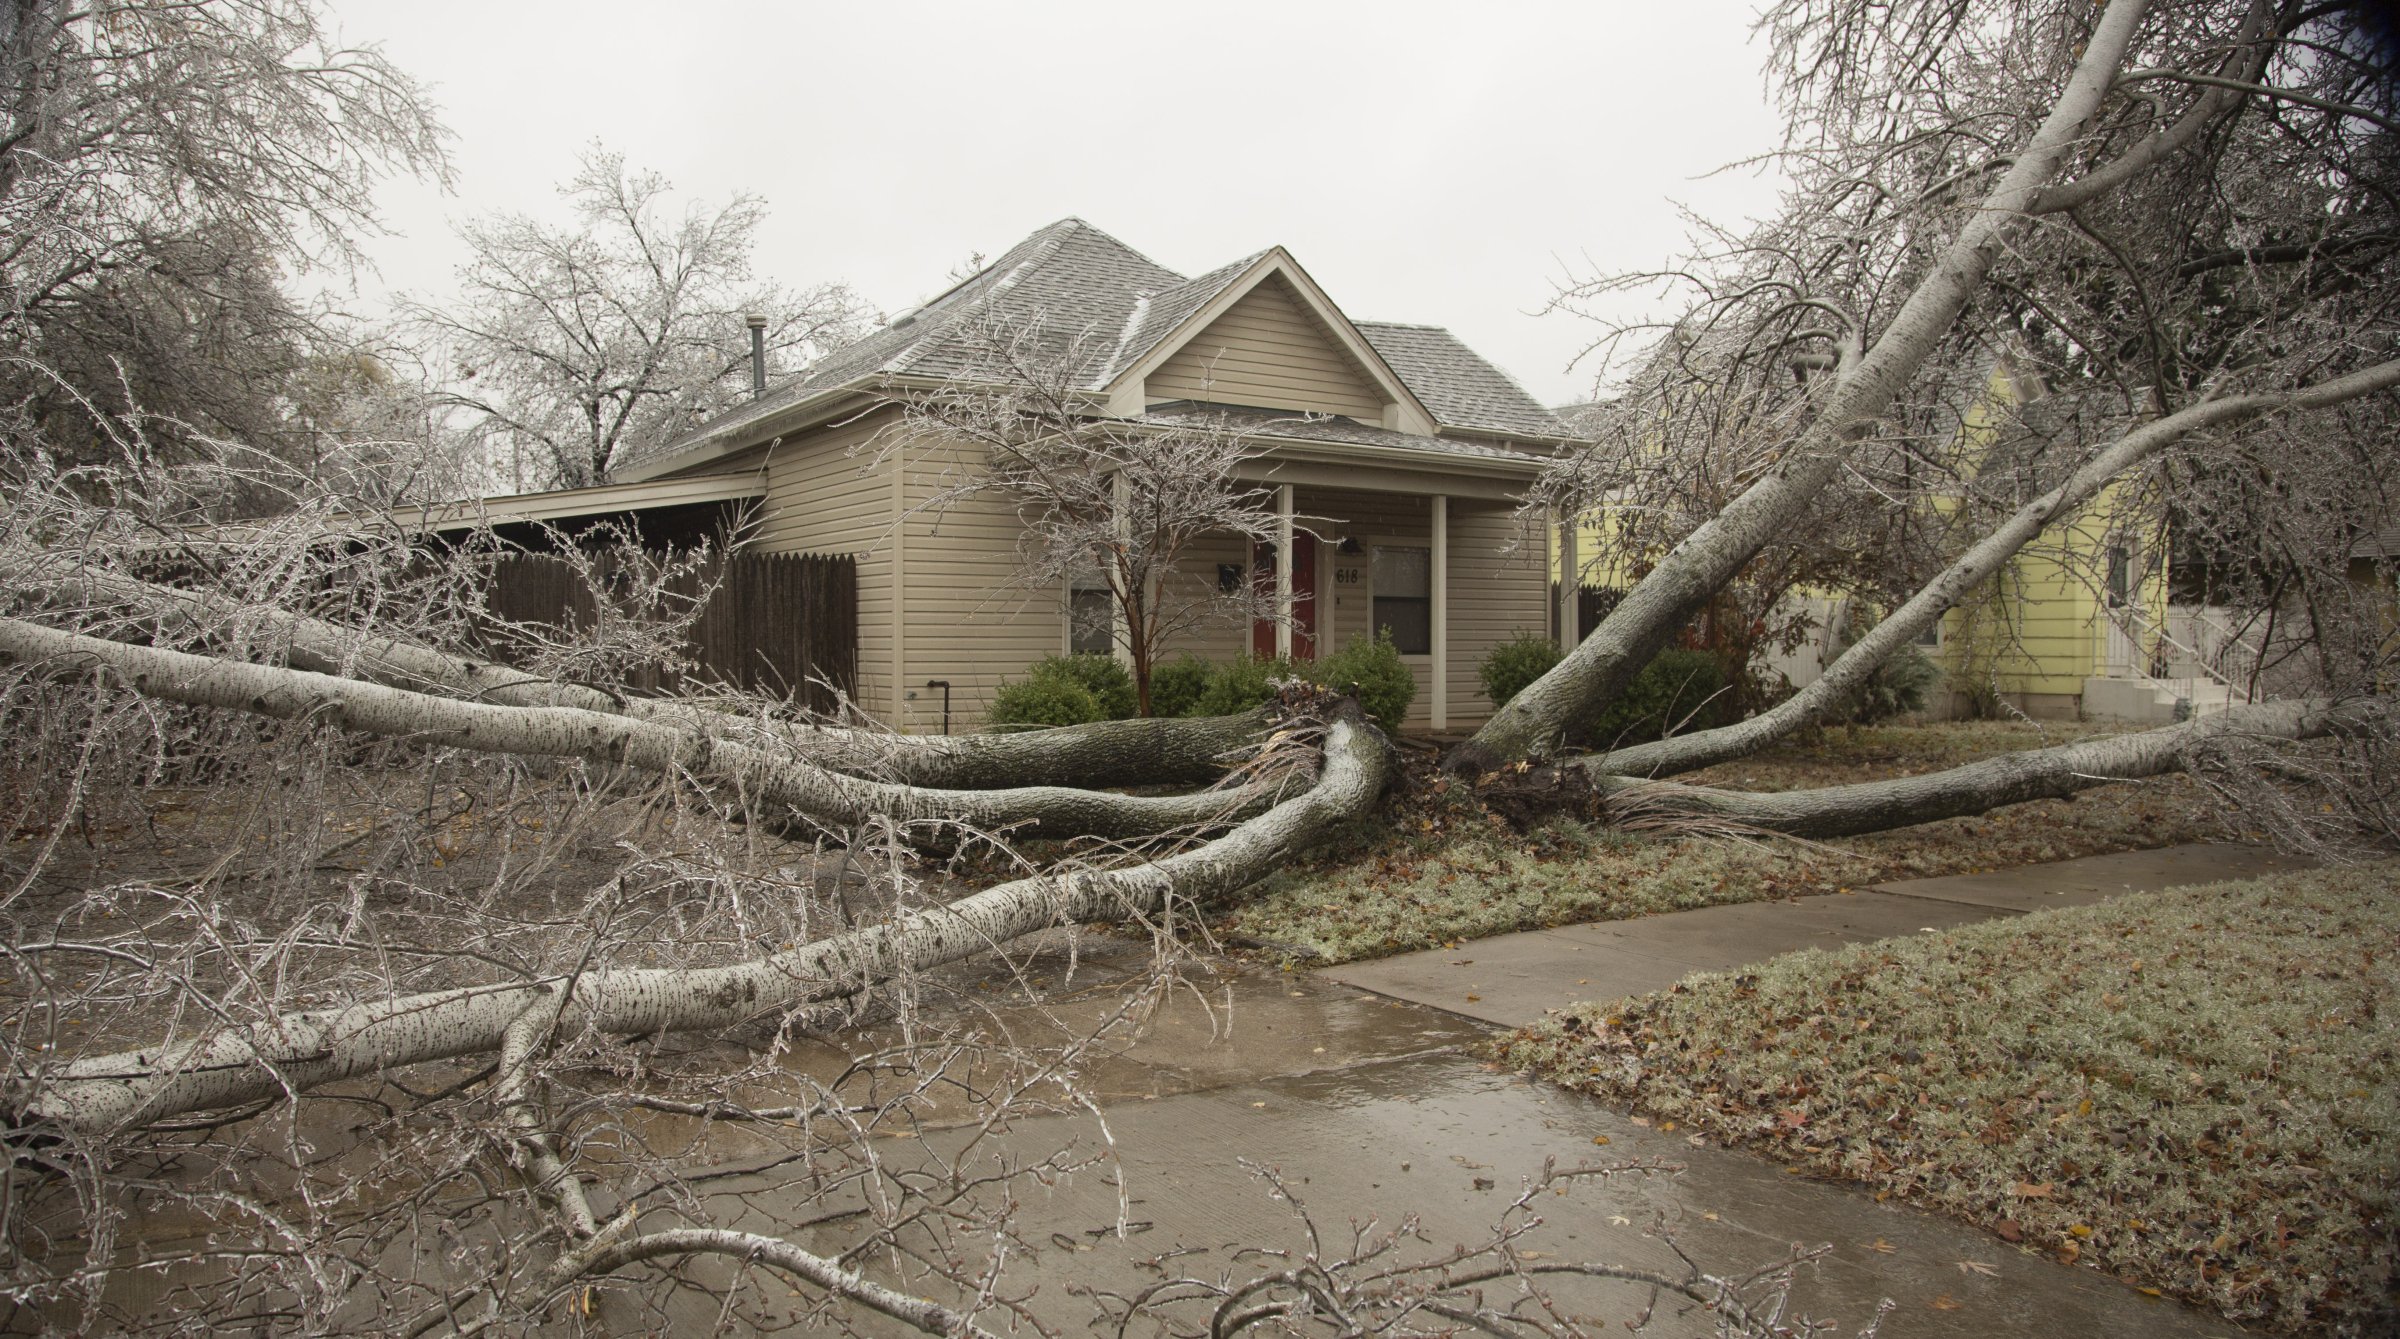 A 50 foot tall tree covers the front yard of a house after it broke in half due to ice an ice storm on November 28, 2015 in Edmond, Oklahoma.